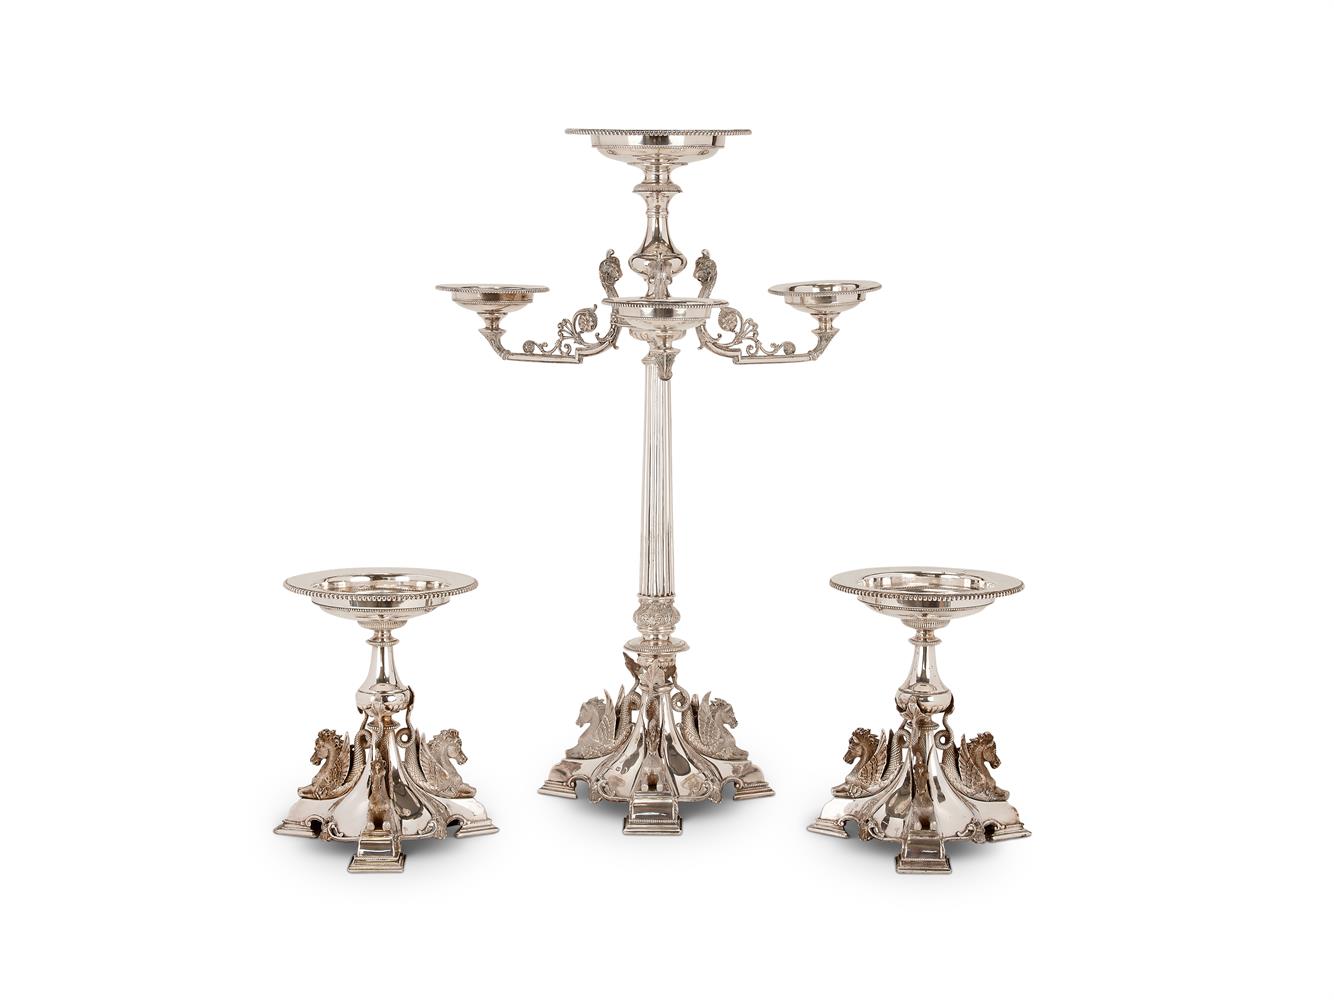 A VICTORIAN SILVER THREE BRANCH EPERGNE OR CENTREPIECE BY HORACE WOODWARD & CO.